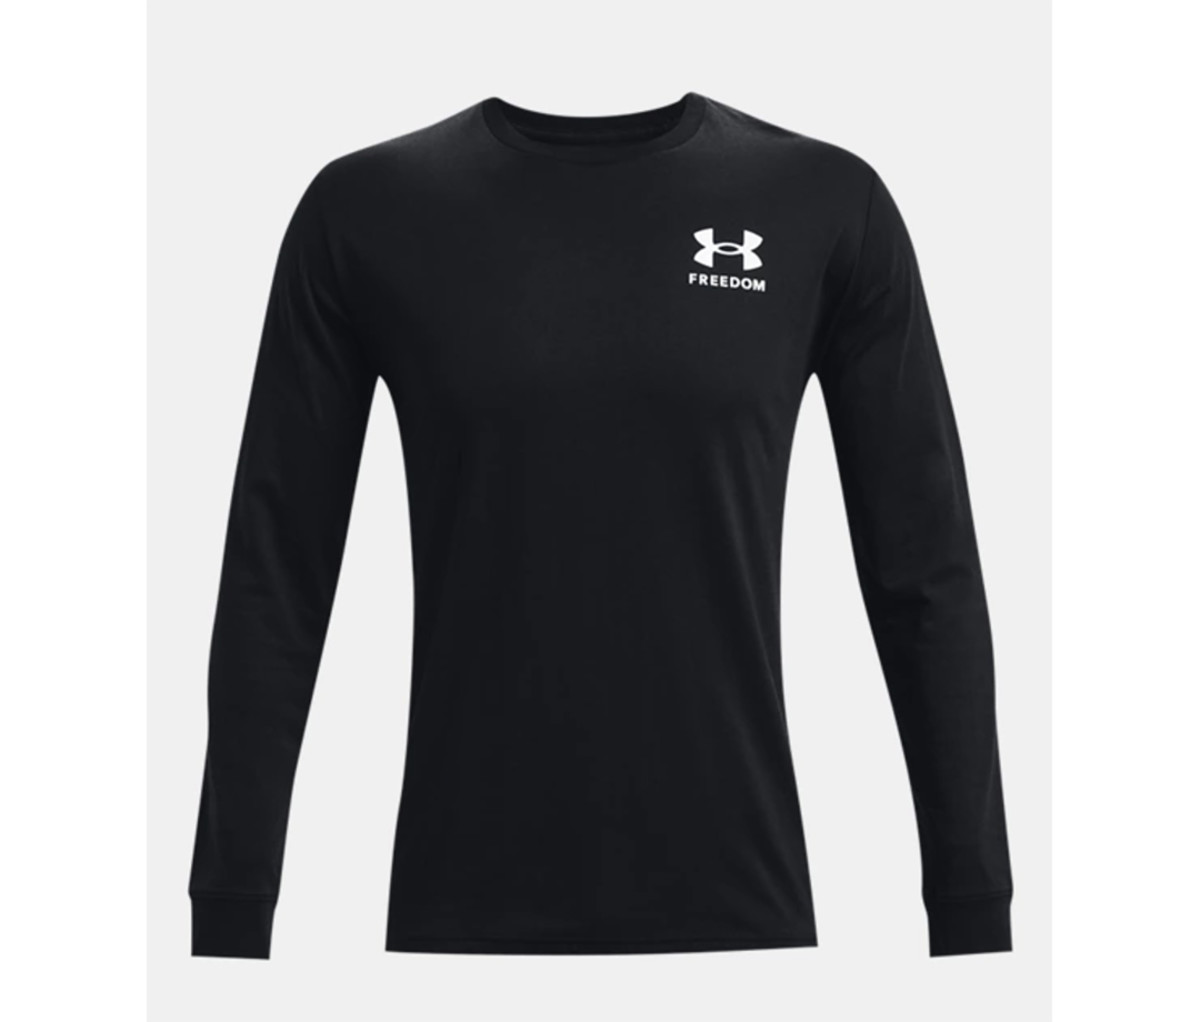 Veterans and First Responders Can Save Big With This Under Armour Sale ...